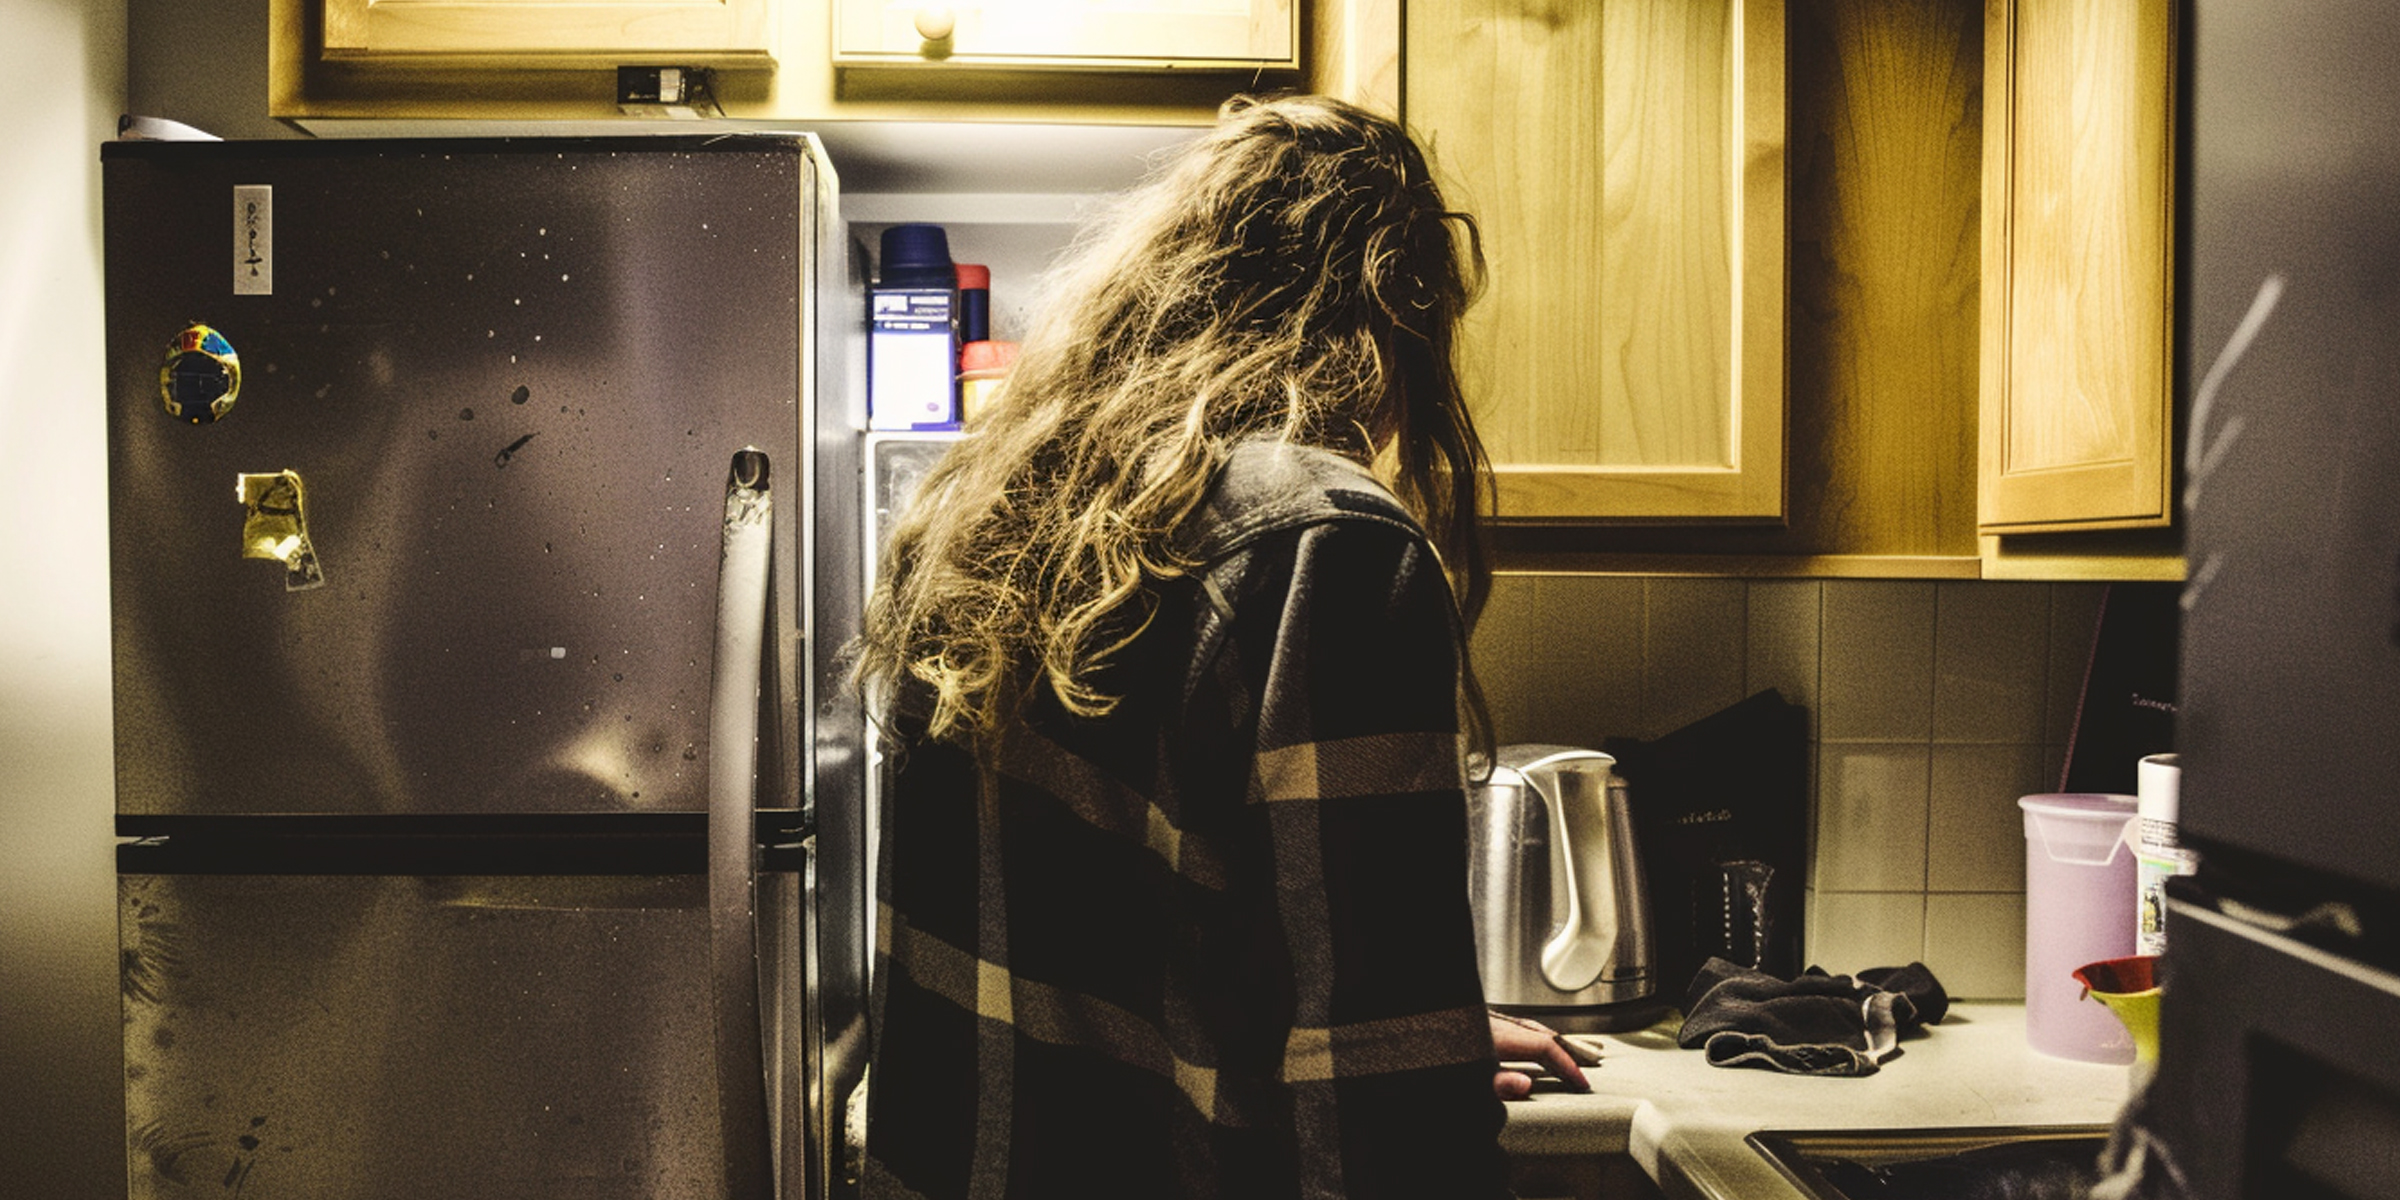 A woman standing at a kitchen counter | Source: Amomama